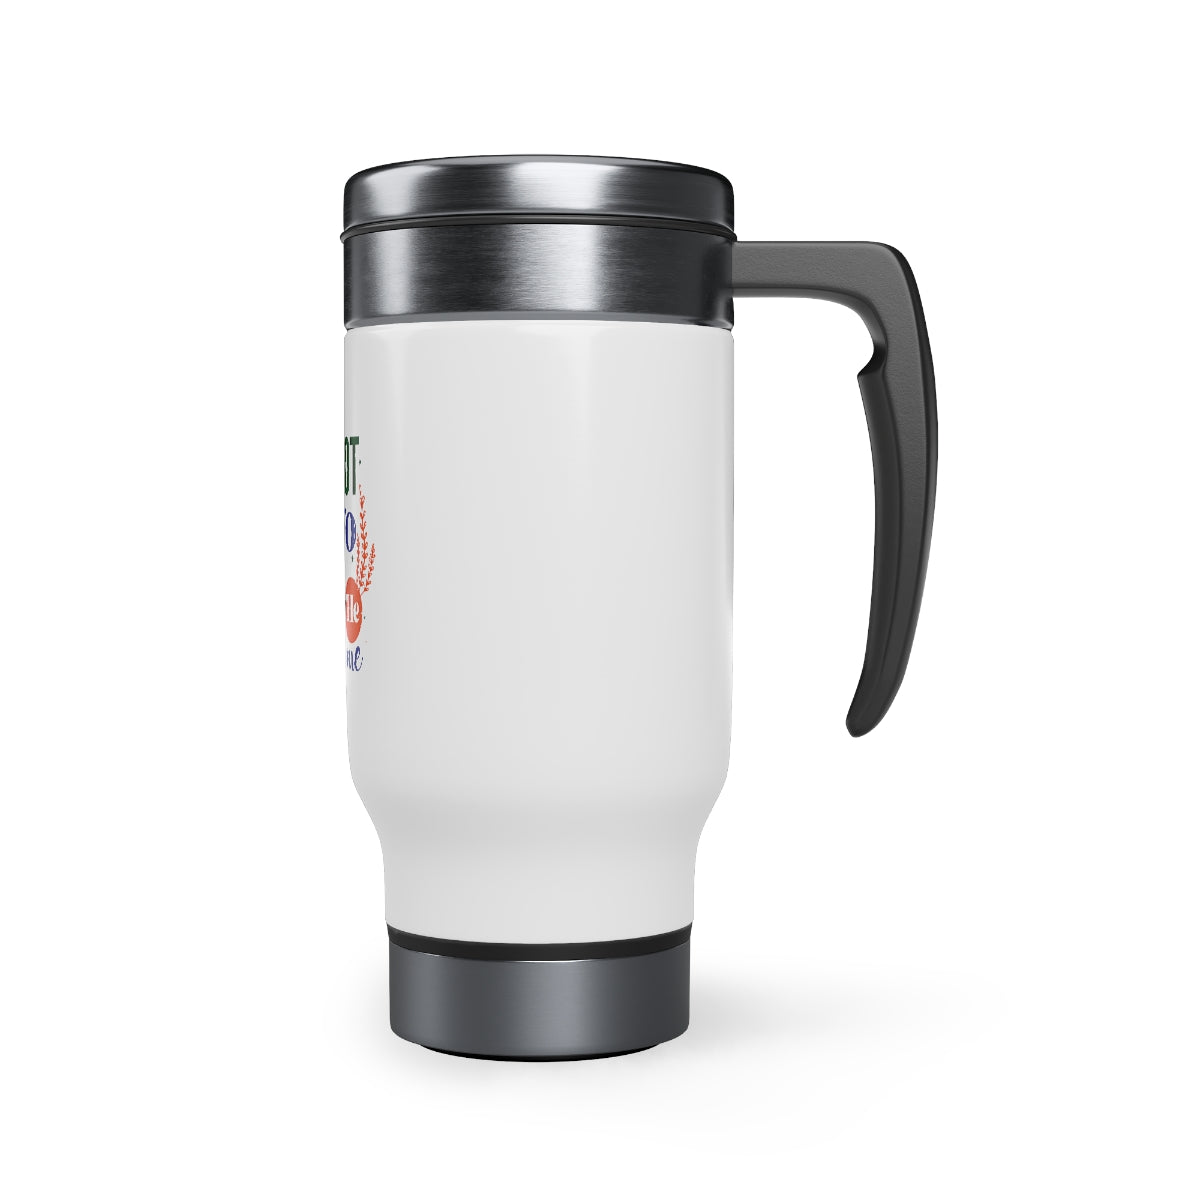 I Did Not Let Go Until He Blessed Me Stainless Steel Travel Mug with Handle, 14oz Printify